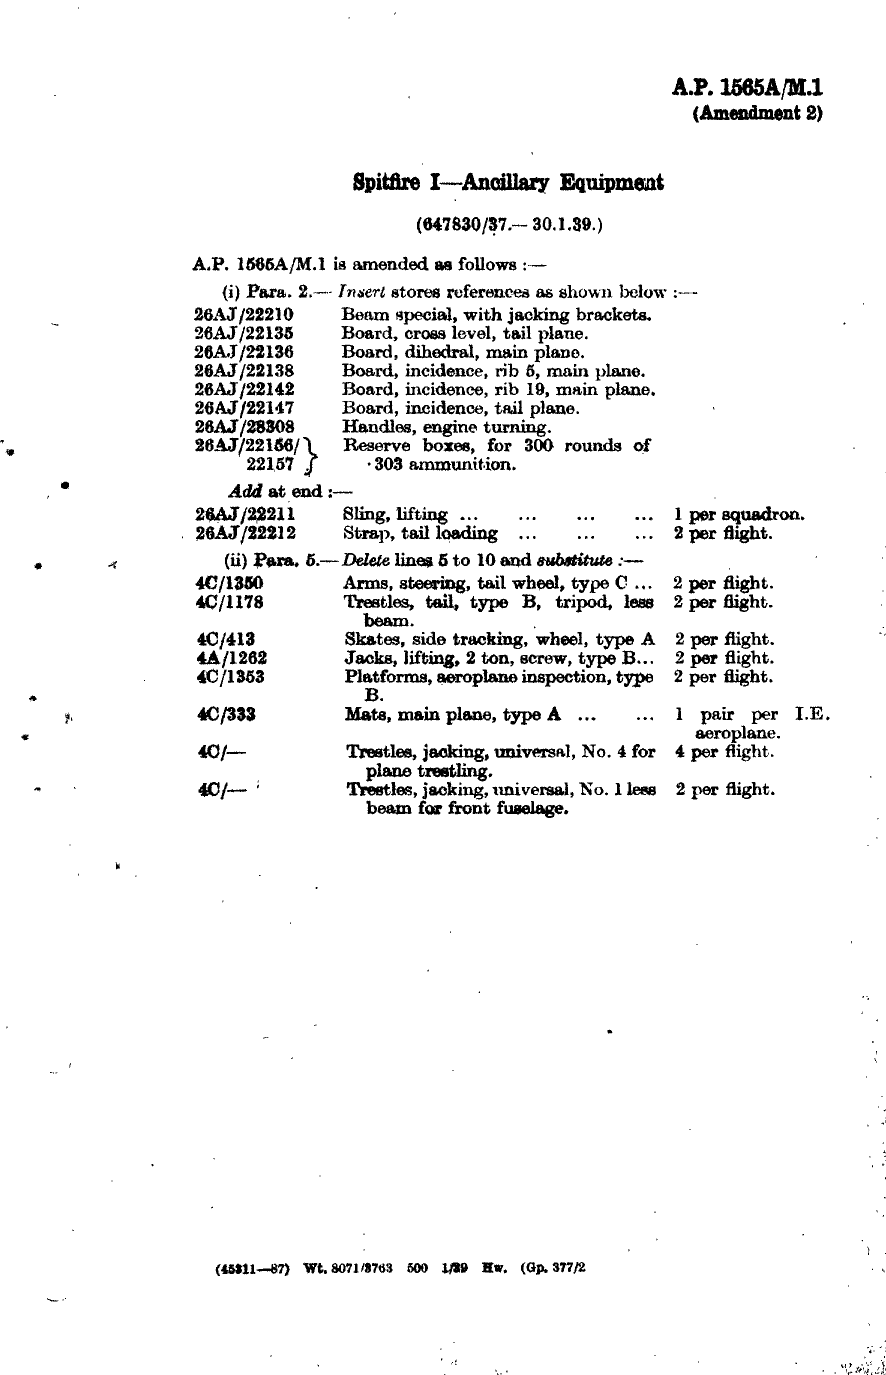 Sample page 1 from AirCorps Library document: Spitfire I Ancillary Equipment